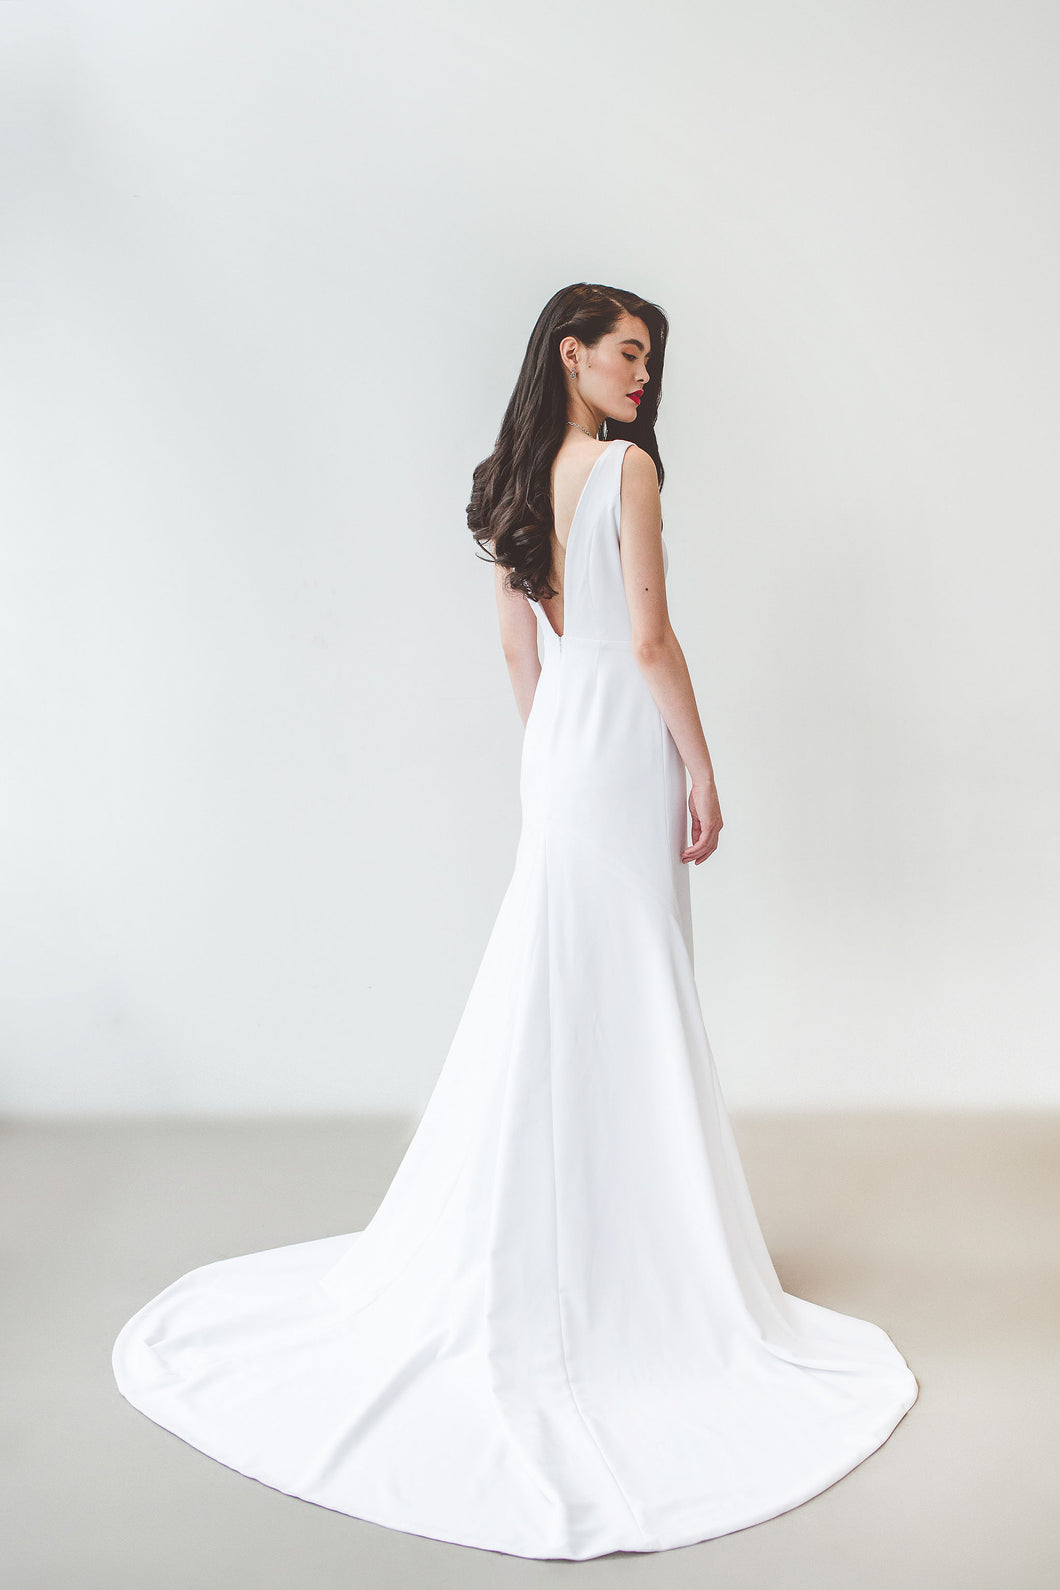 A unique backless minimalist wedding dress with long train handmade in Vancouver.